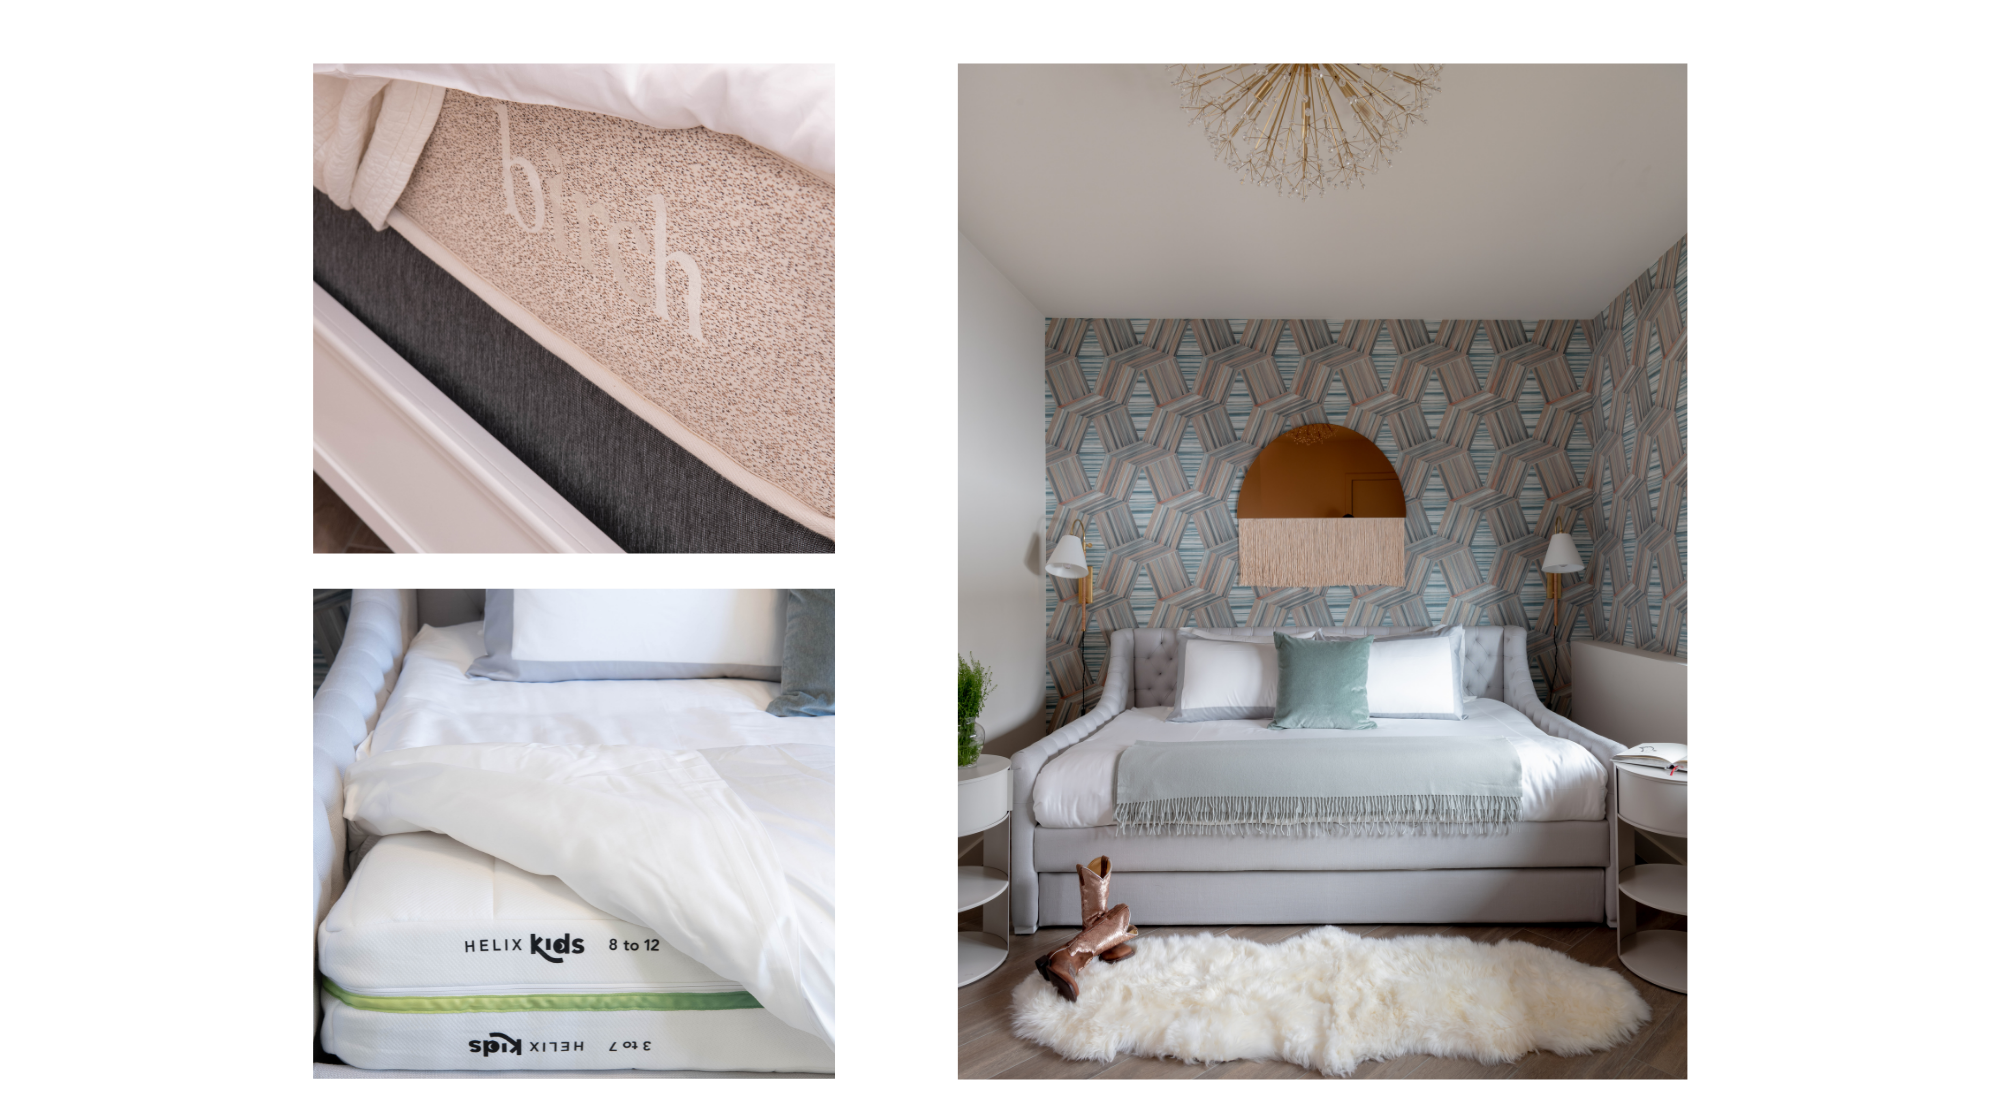 Laura selected Helix and Birch mattresses for her home.